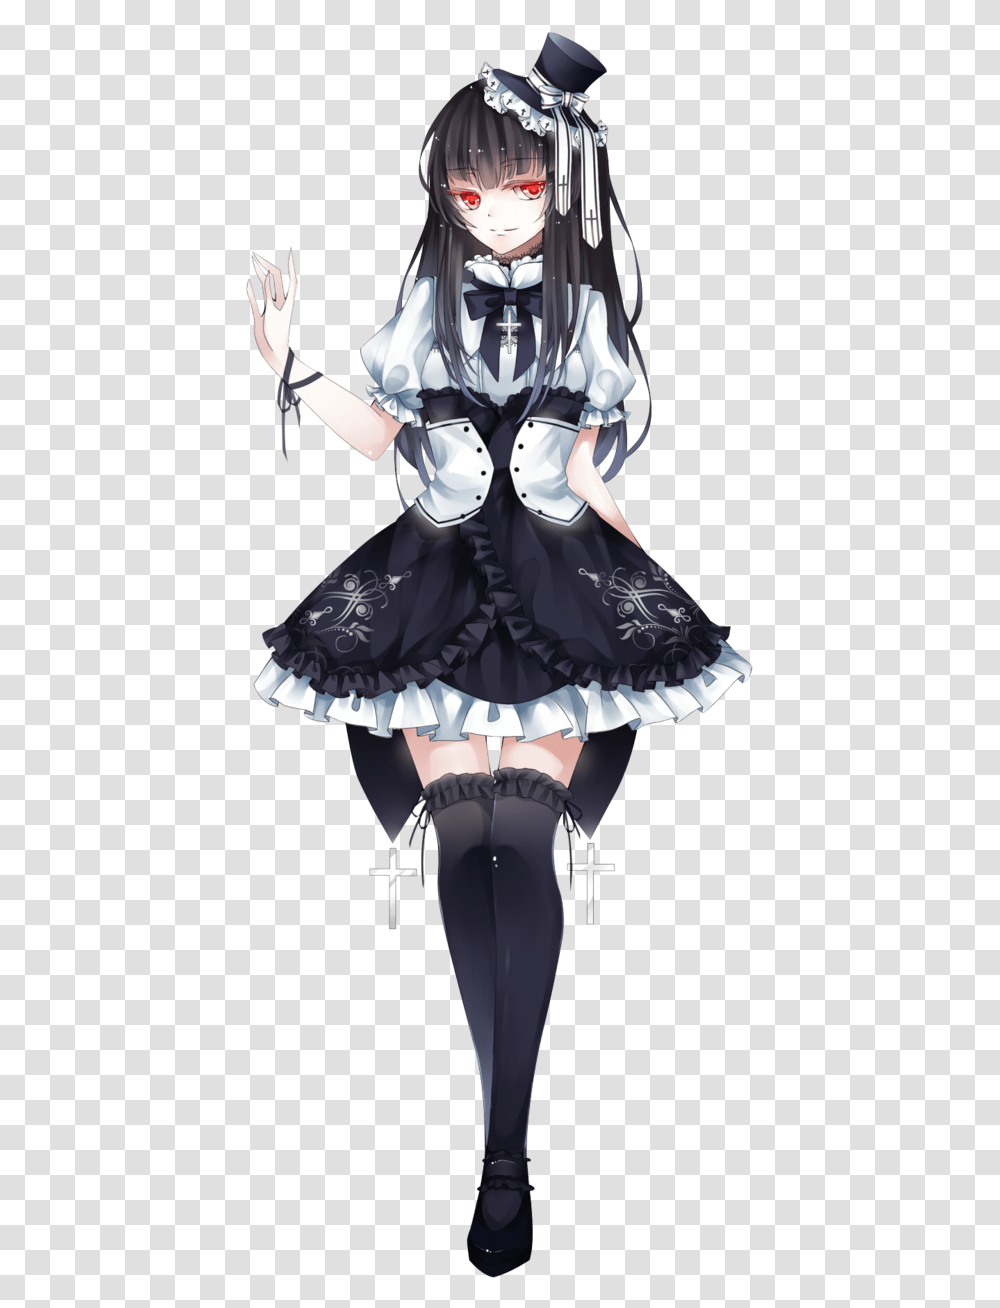 Anime Girl And Manga Image Anime Girl With Top Hat, Person, Comics, Book, Costume Transparent Png